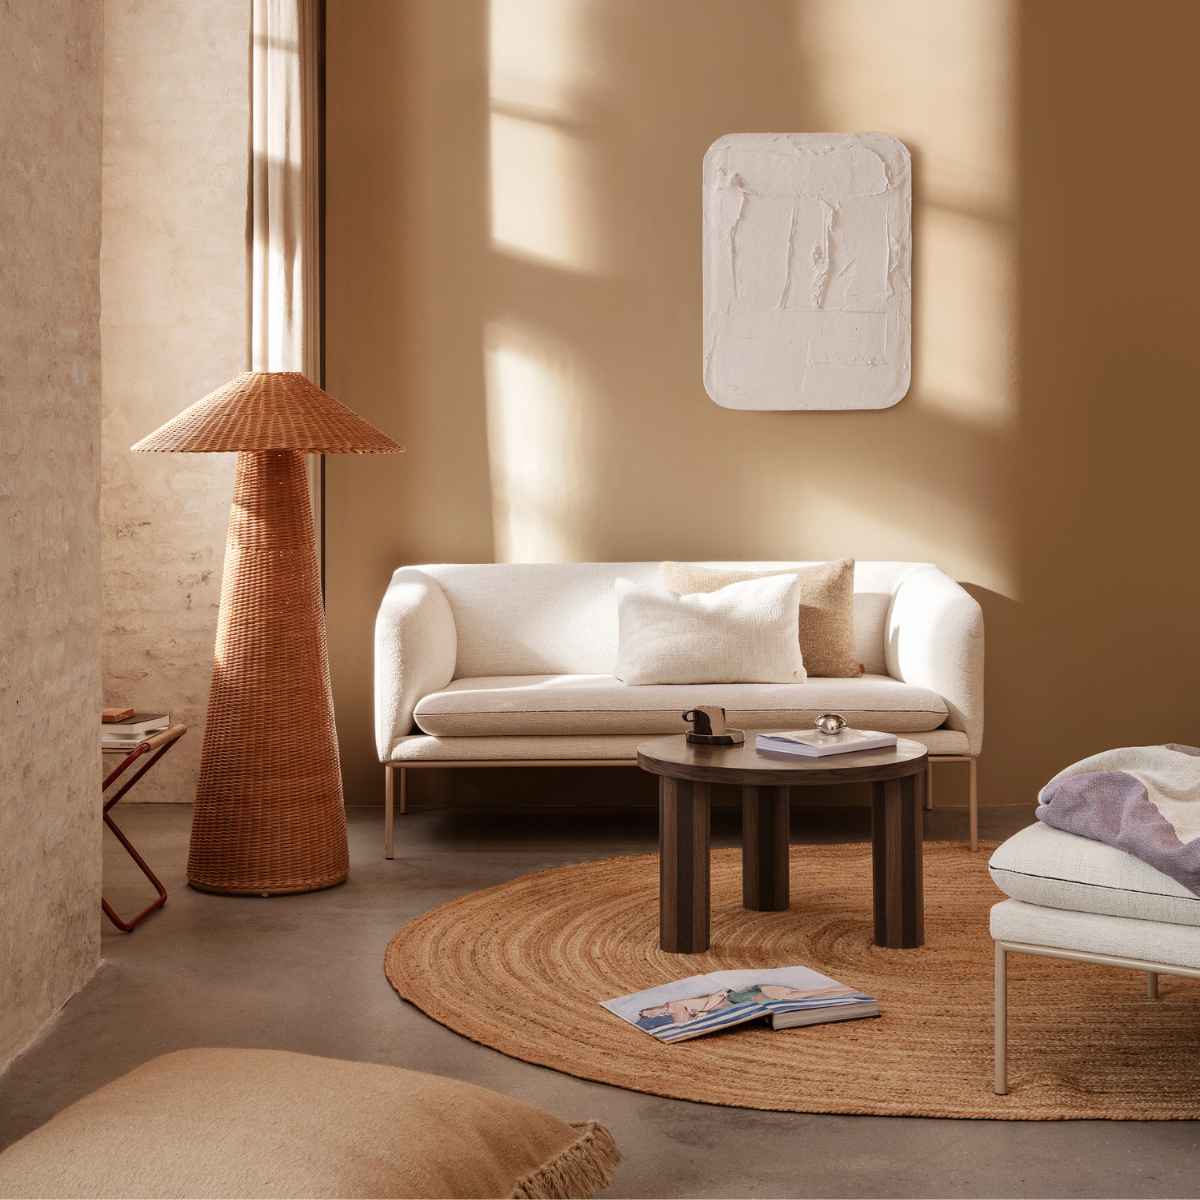 Turn Pouf Cashmere Boucle Off White - ferm LIVING